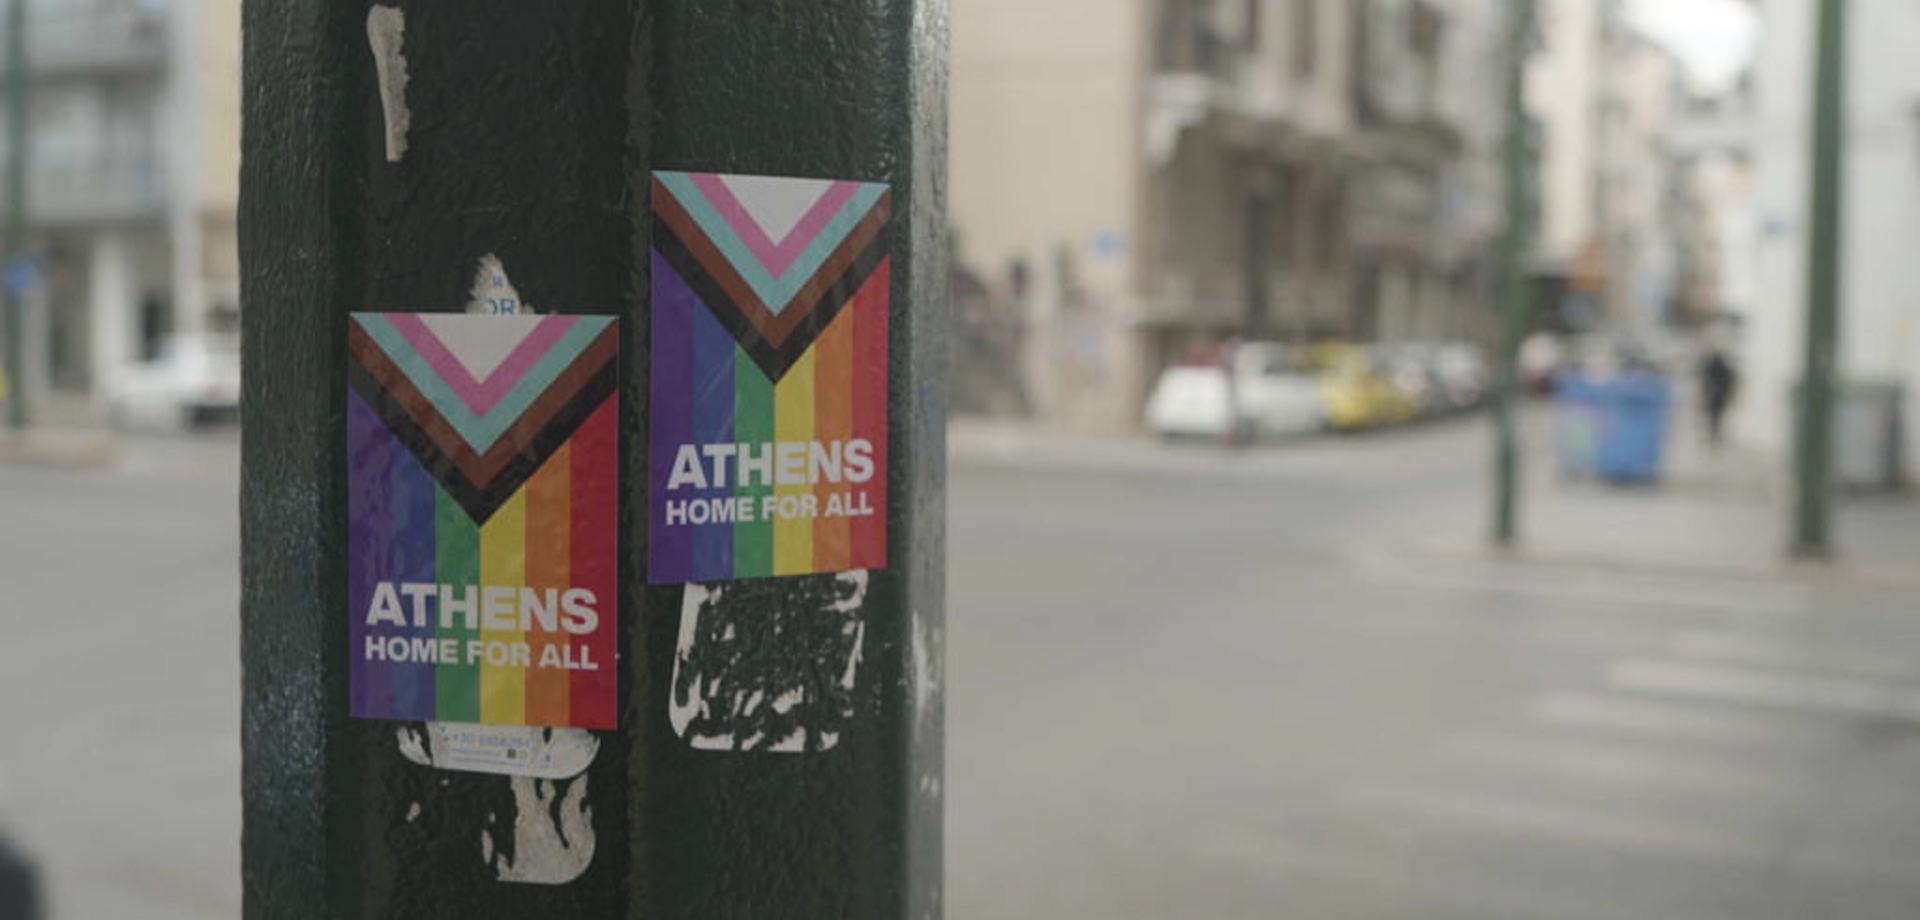 ATHENS HOME FOR ALL